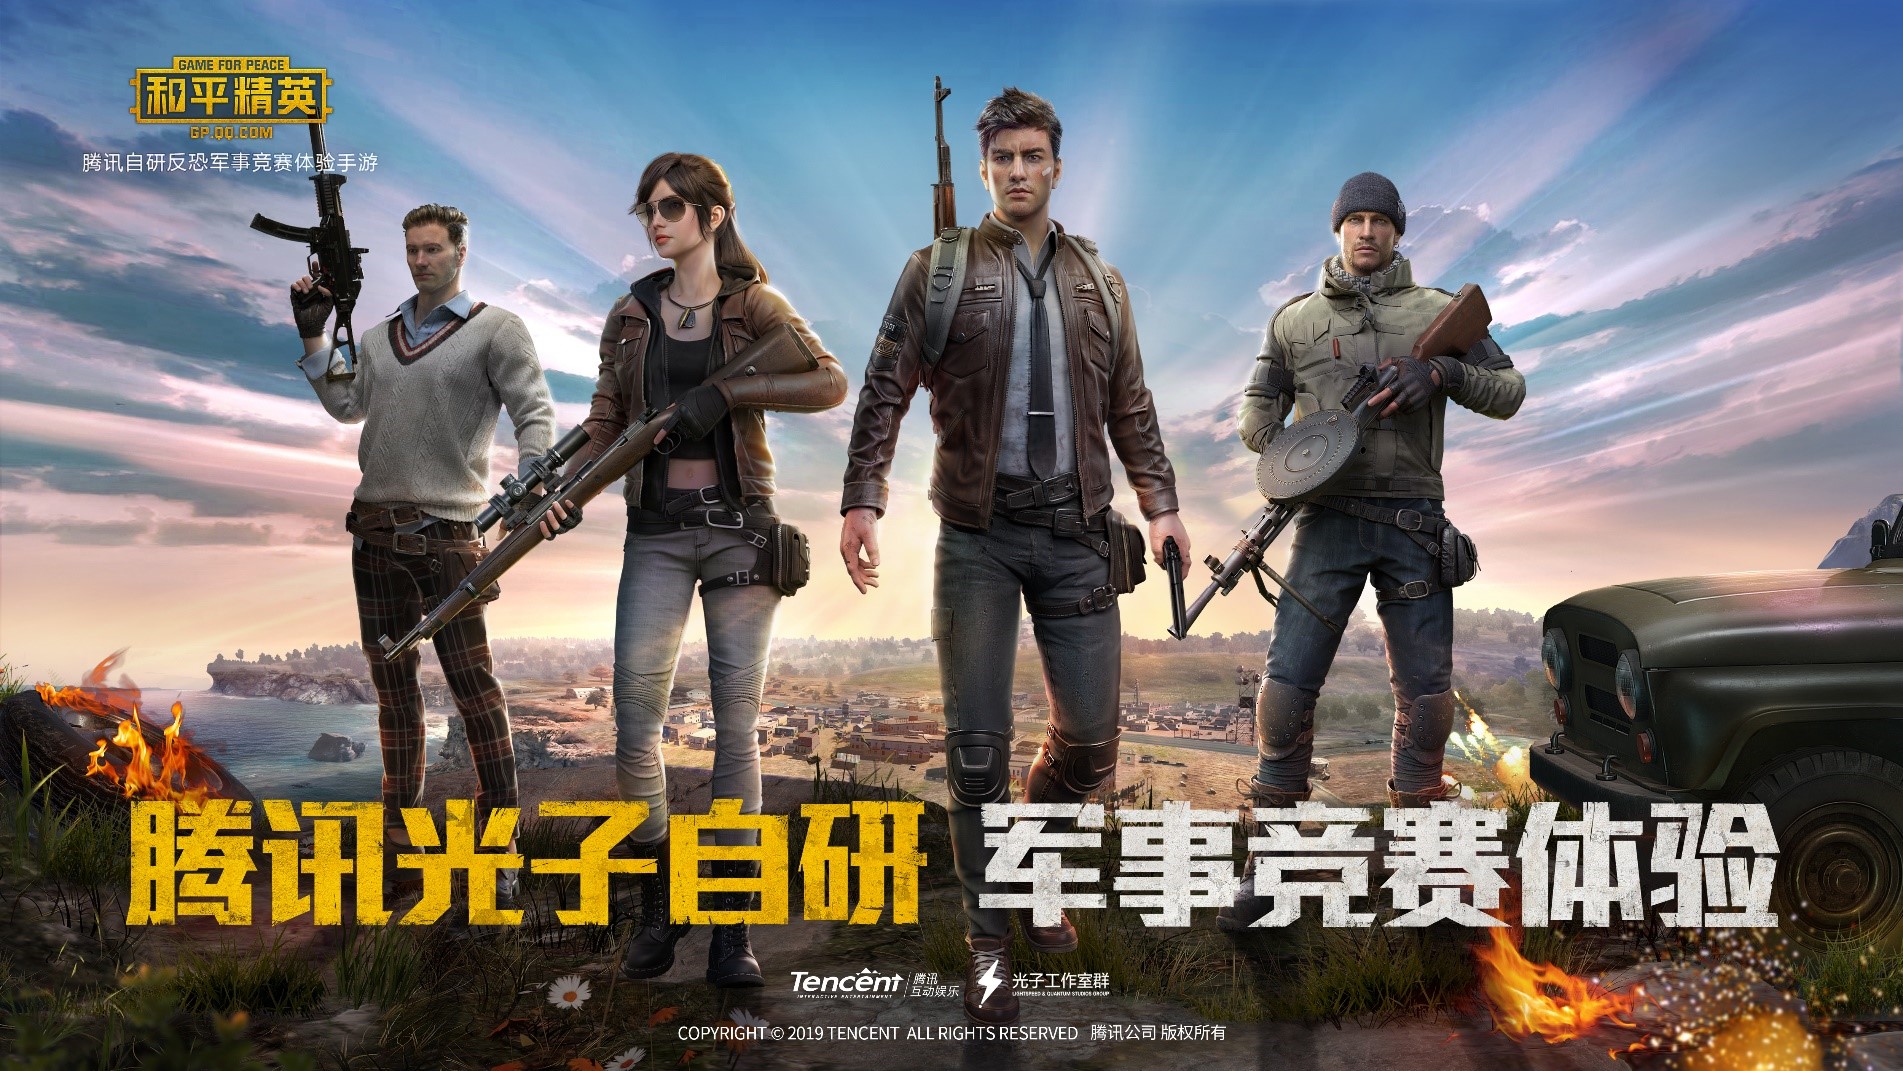 Tencent mobile games. Peace Elite. Game for Peace. Tencent games PUBG. Tencent mobile игры.